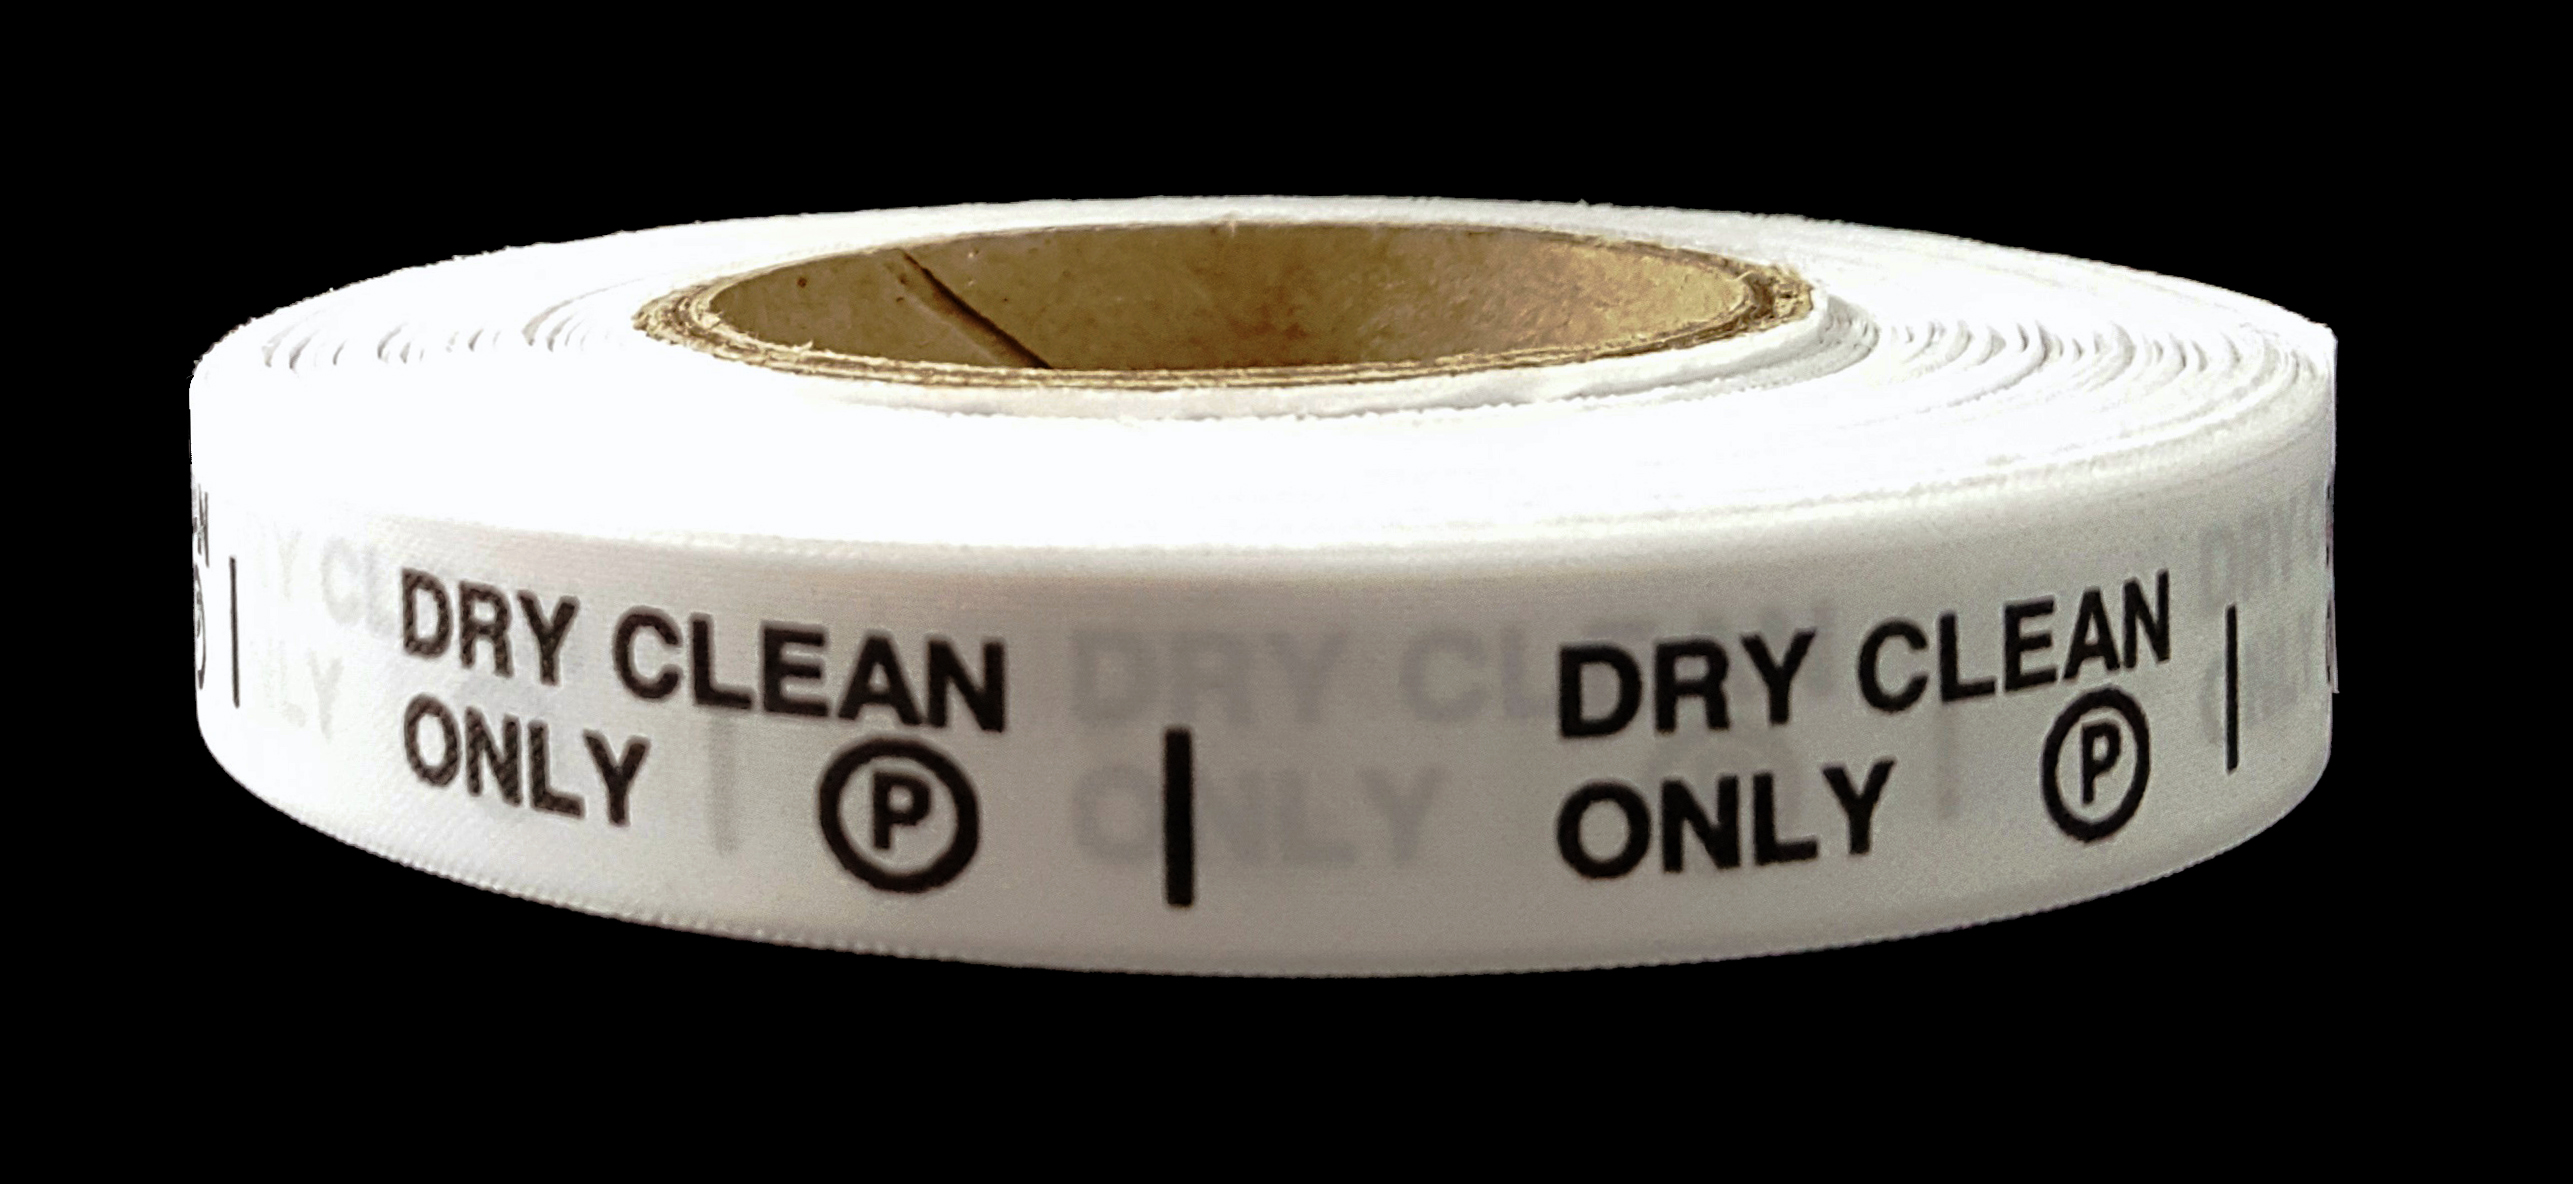 Dry Clean Only Care Labels